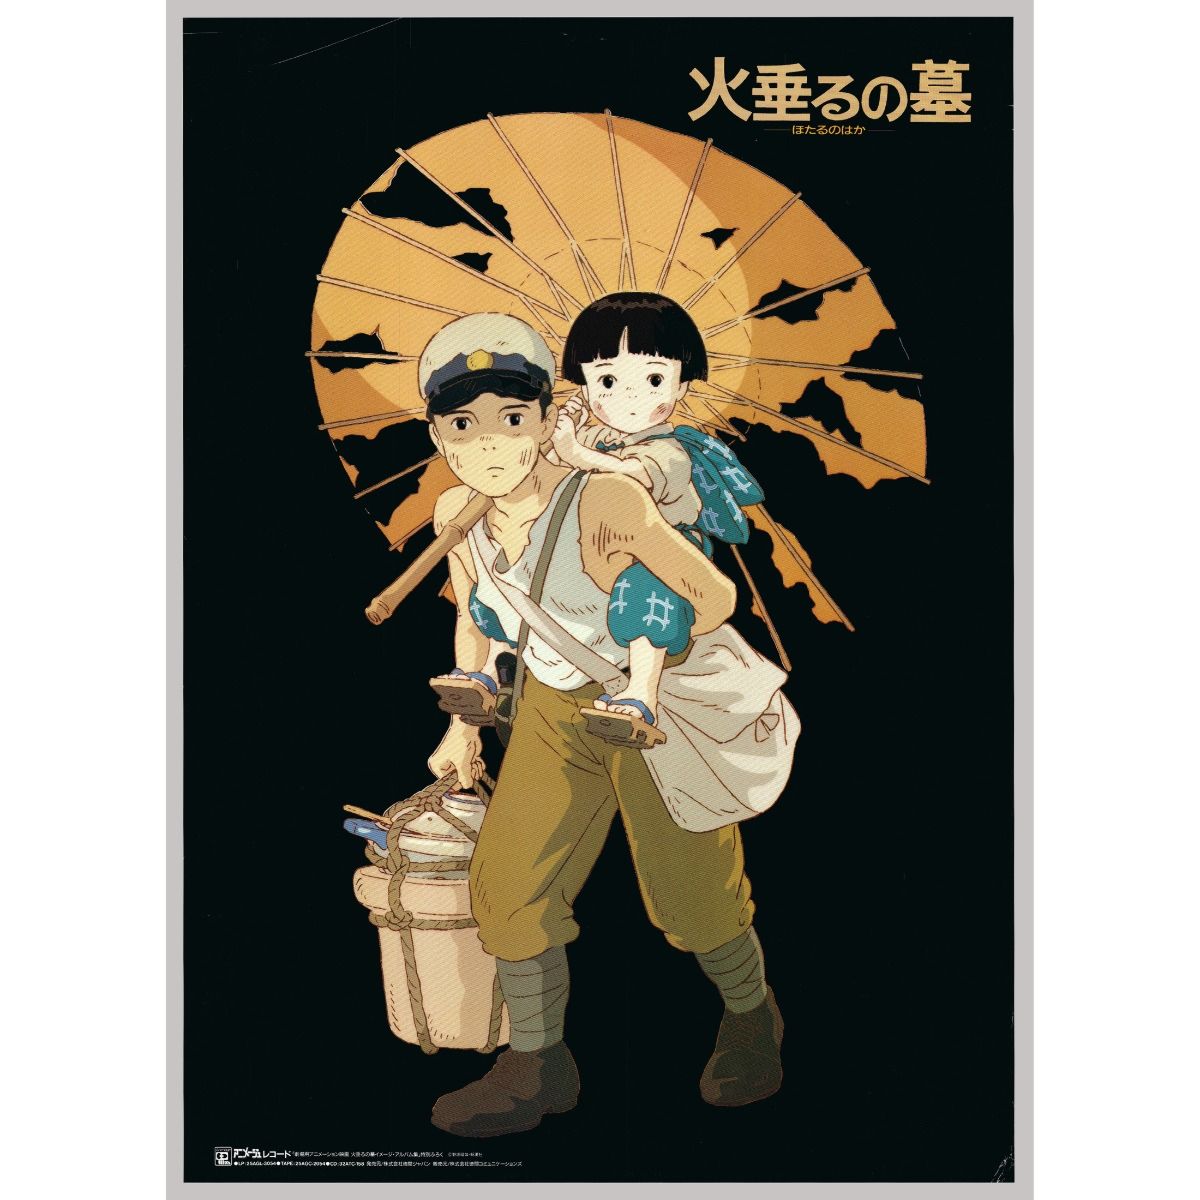 Ghibli Blog: Studio Ghibli, Animation and the Movies: Grave of the Fireflies  - The Live-Action Movies